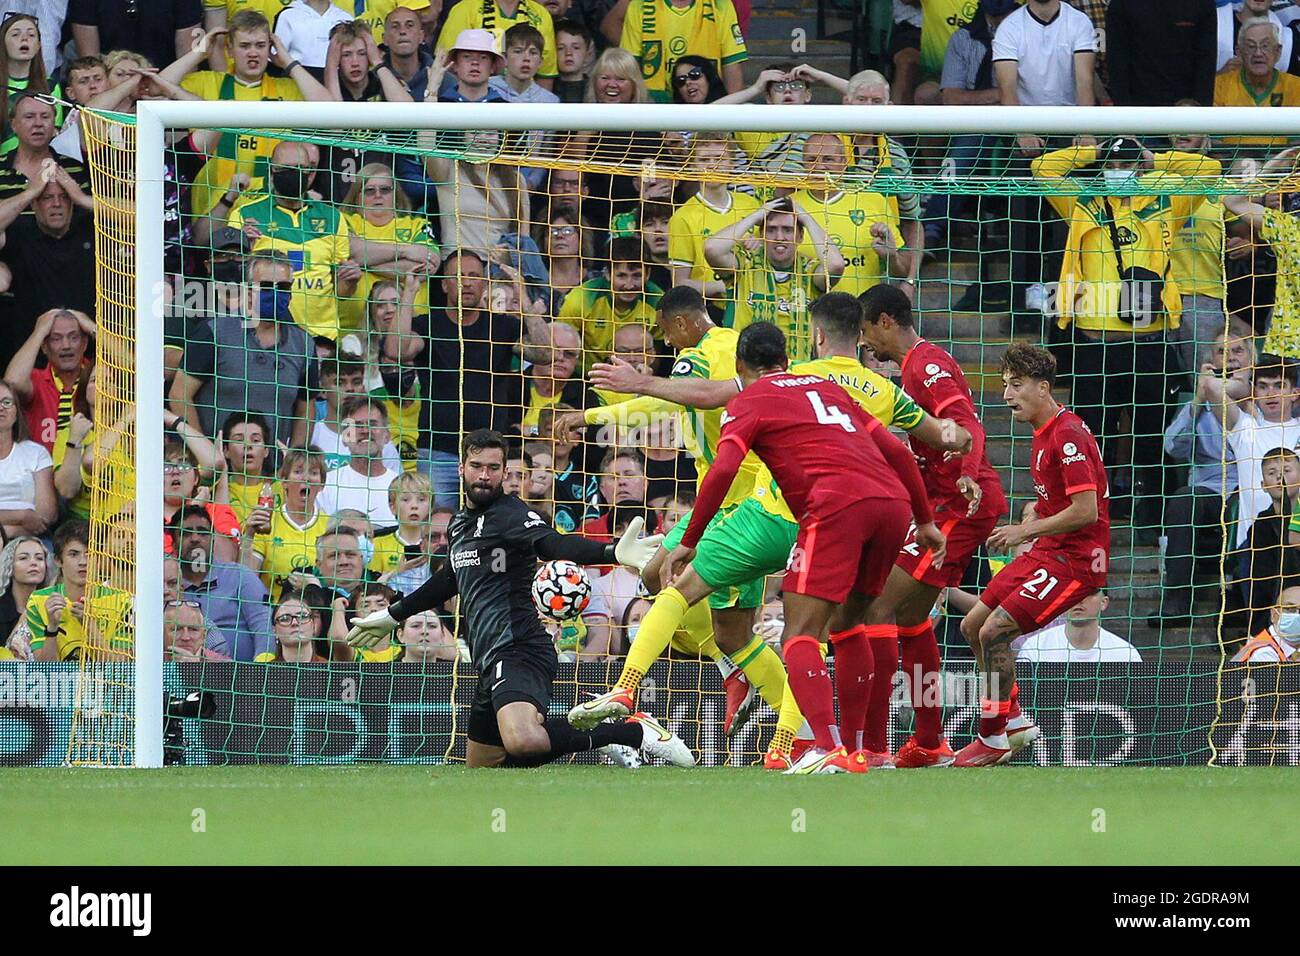 Norwich, UK. 14th Aug, 2021. Alisson Becker of Liverpool blocks the shot on goal by Grant Hanley of Norwich City during the Premier League match between Norwich City and Liverpool at Carrow Road on August 14th 2021 in Norwich, England. (Photo by Mick Kearns/phcimages.com) Credit: PHC Images/Alamy Live News Stock Photo